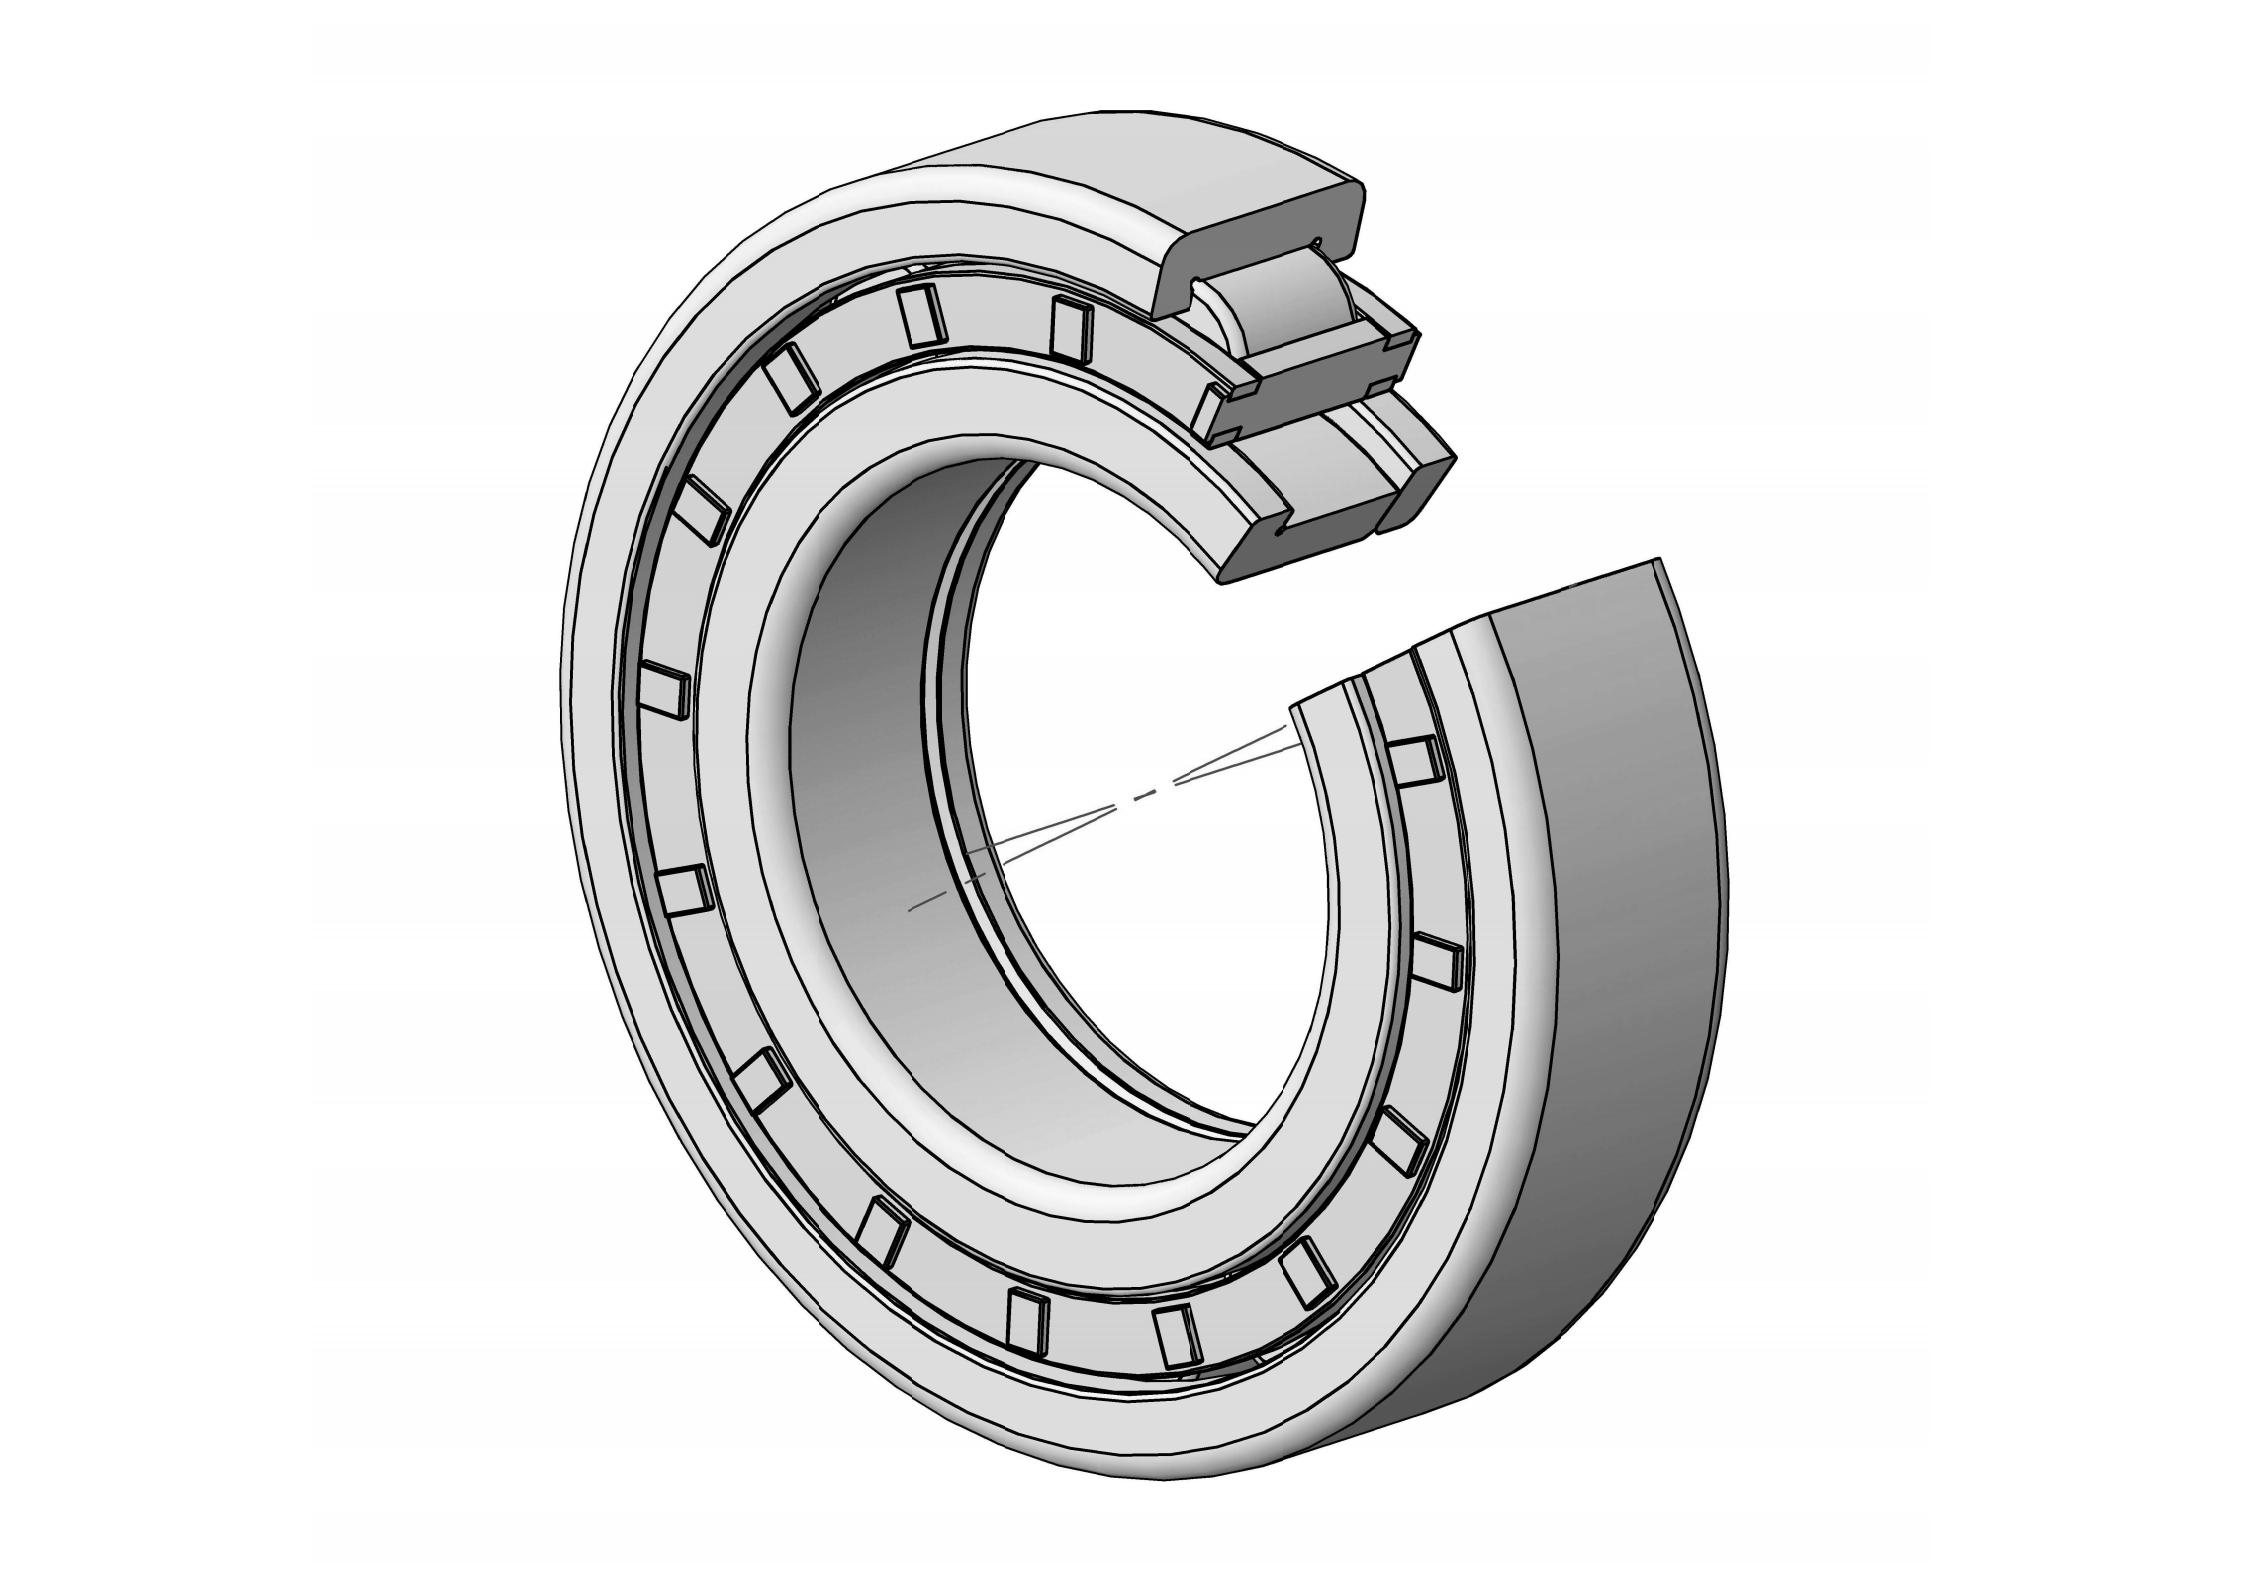 NUP324-EM Single Row Cylindrical roller bearing 